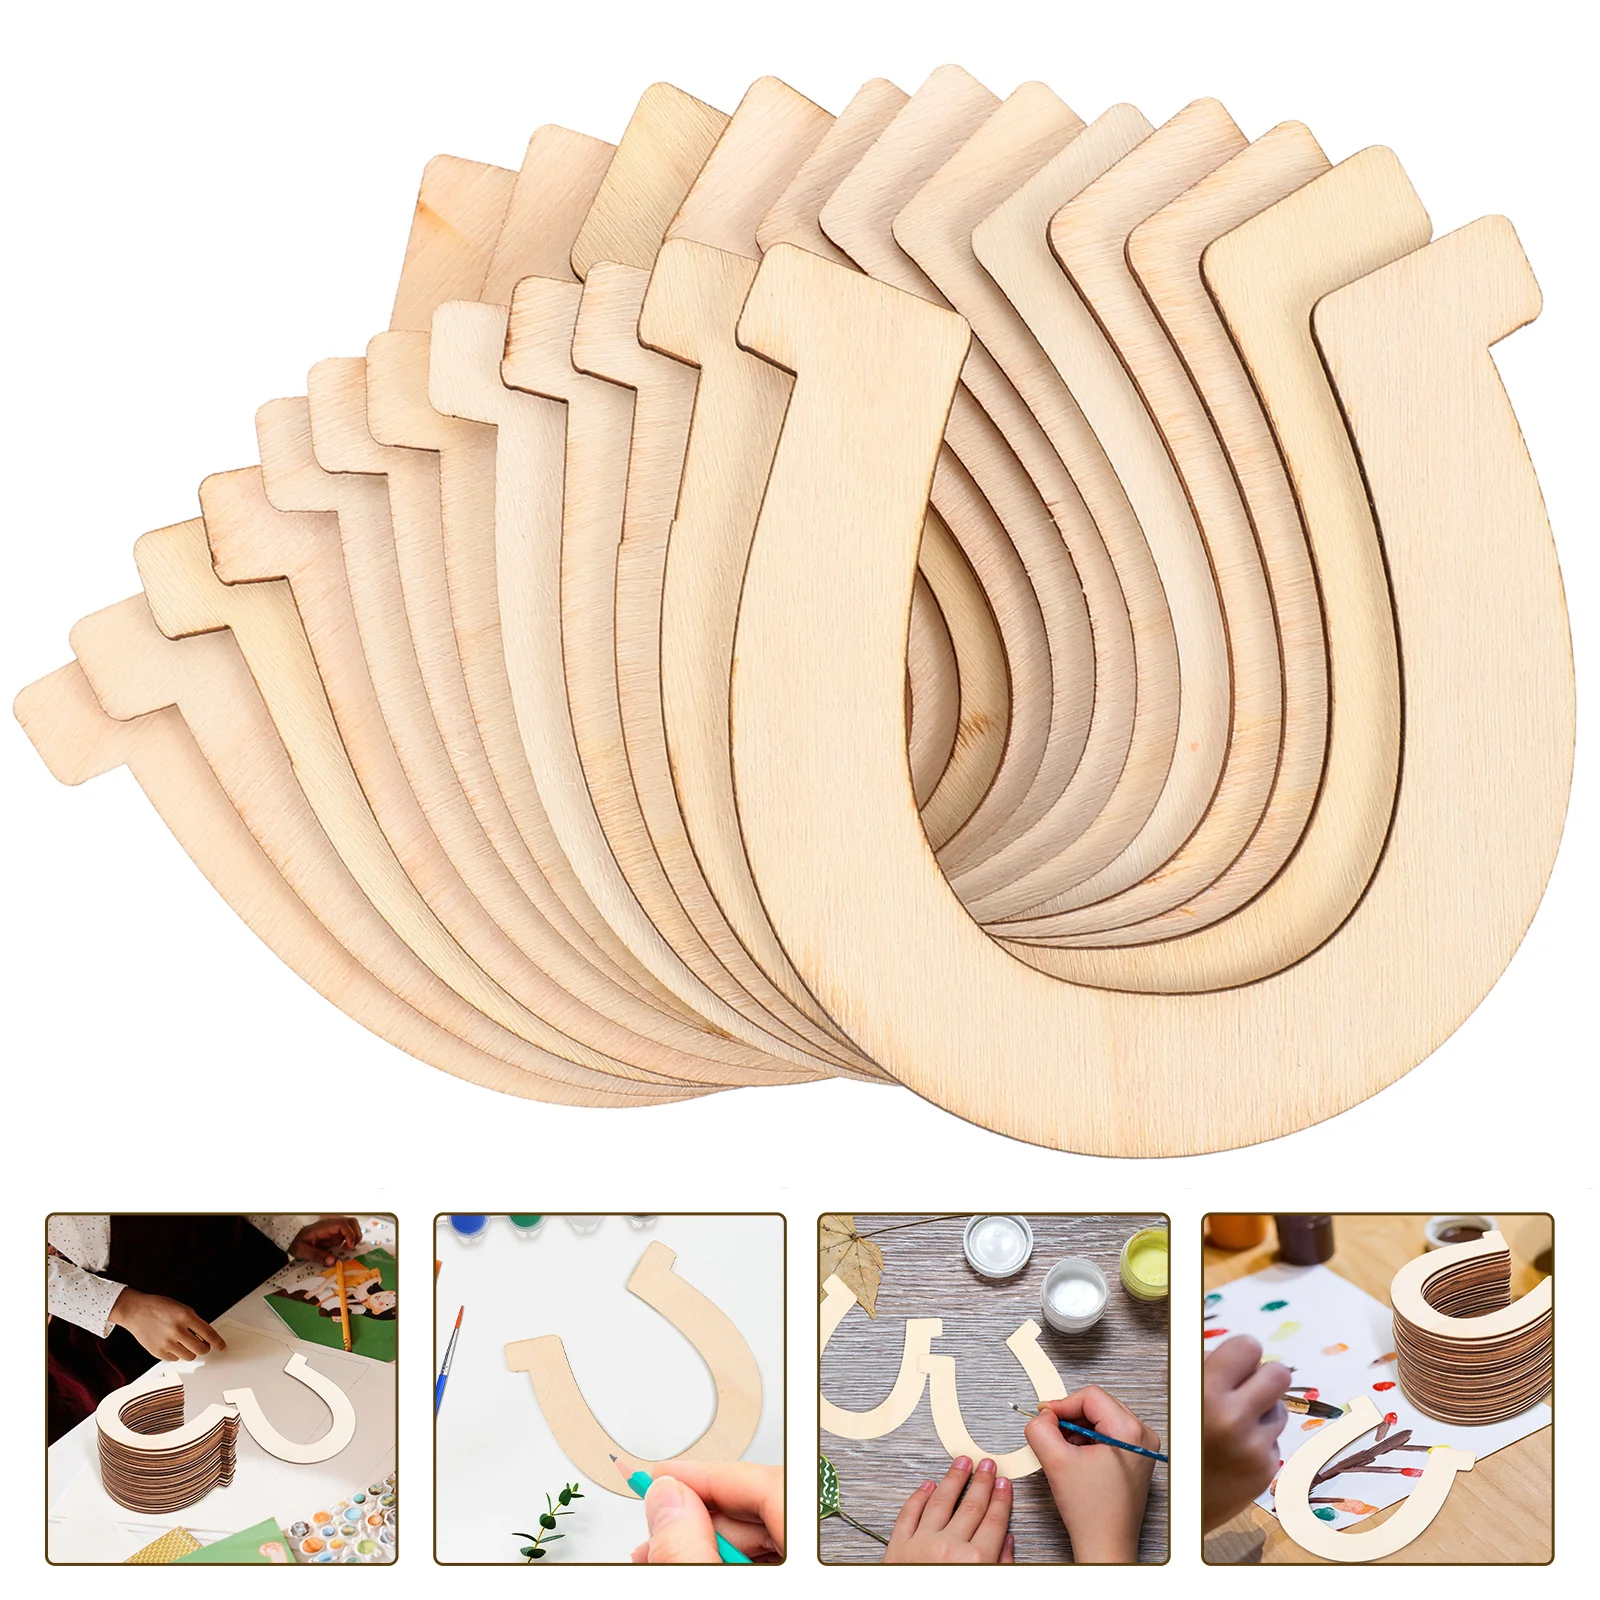 

Wood Unfinished Horseshoe Wooden Cutouts Pieces Graffiti Slices Diy Crafts Craft Chips Horse Piece Shapes Decorations Gift Disc